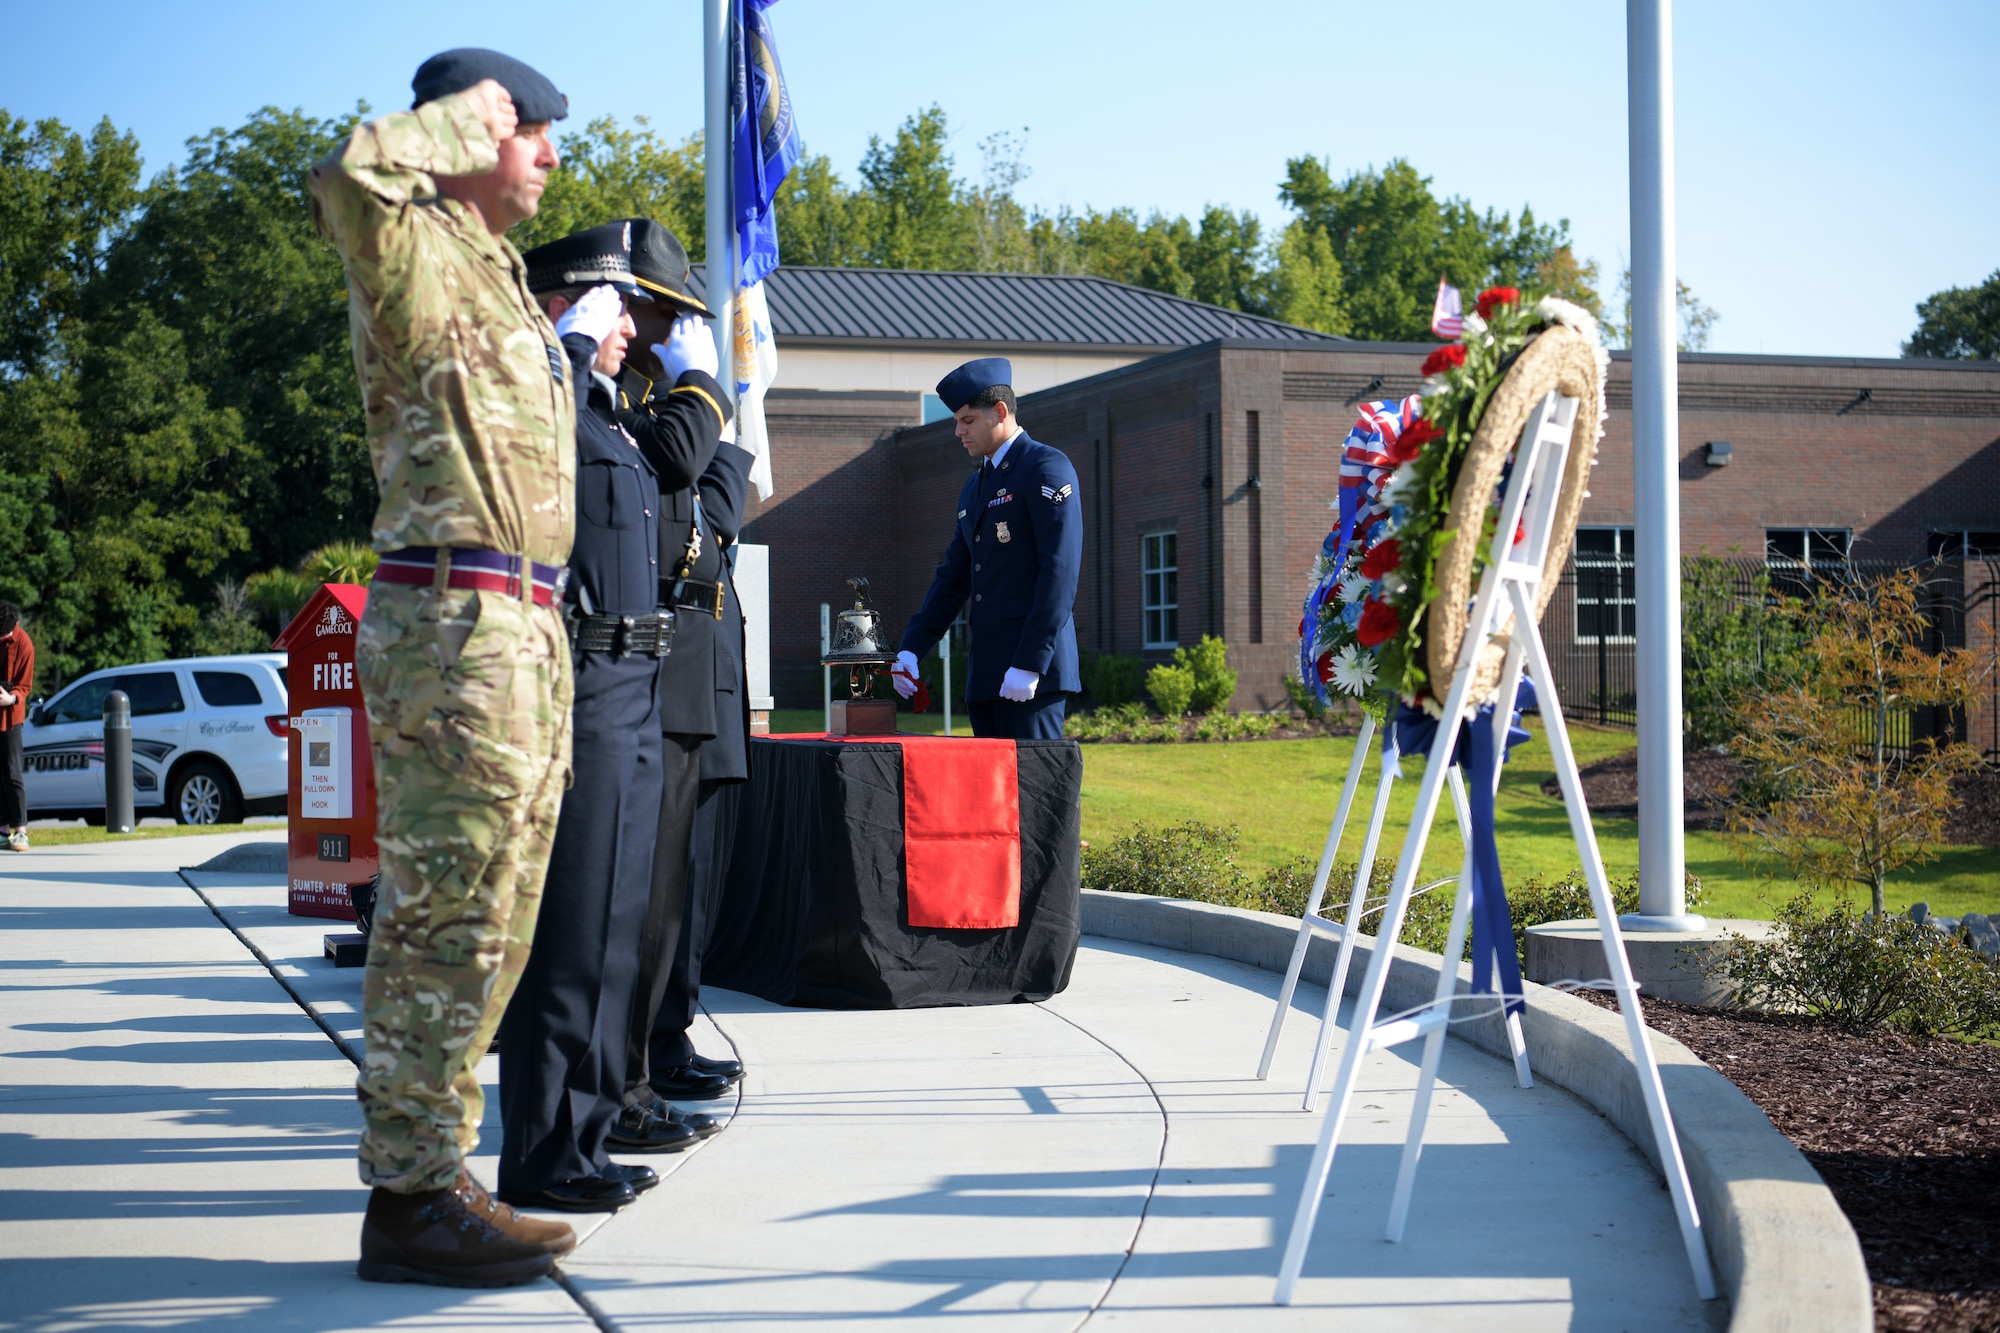 Members of a joint honor guard from Sumter first responders and Royal Air Force salute wreaths while an Airman assigned to the 20th Civil Engineer Squadron rings a bell during a 9/11 memorial ceremony in Sumter, S.C., Sept. 11, 2021. The ceremony was held in remembrance of the 20th anniversary of the Sept. 11, 2001, attacks across the United States. (U.S. Air Force photo by Staff Sgt. K. Tucker Owen)